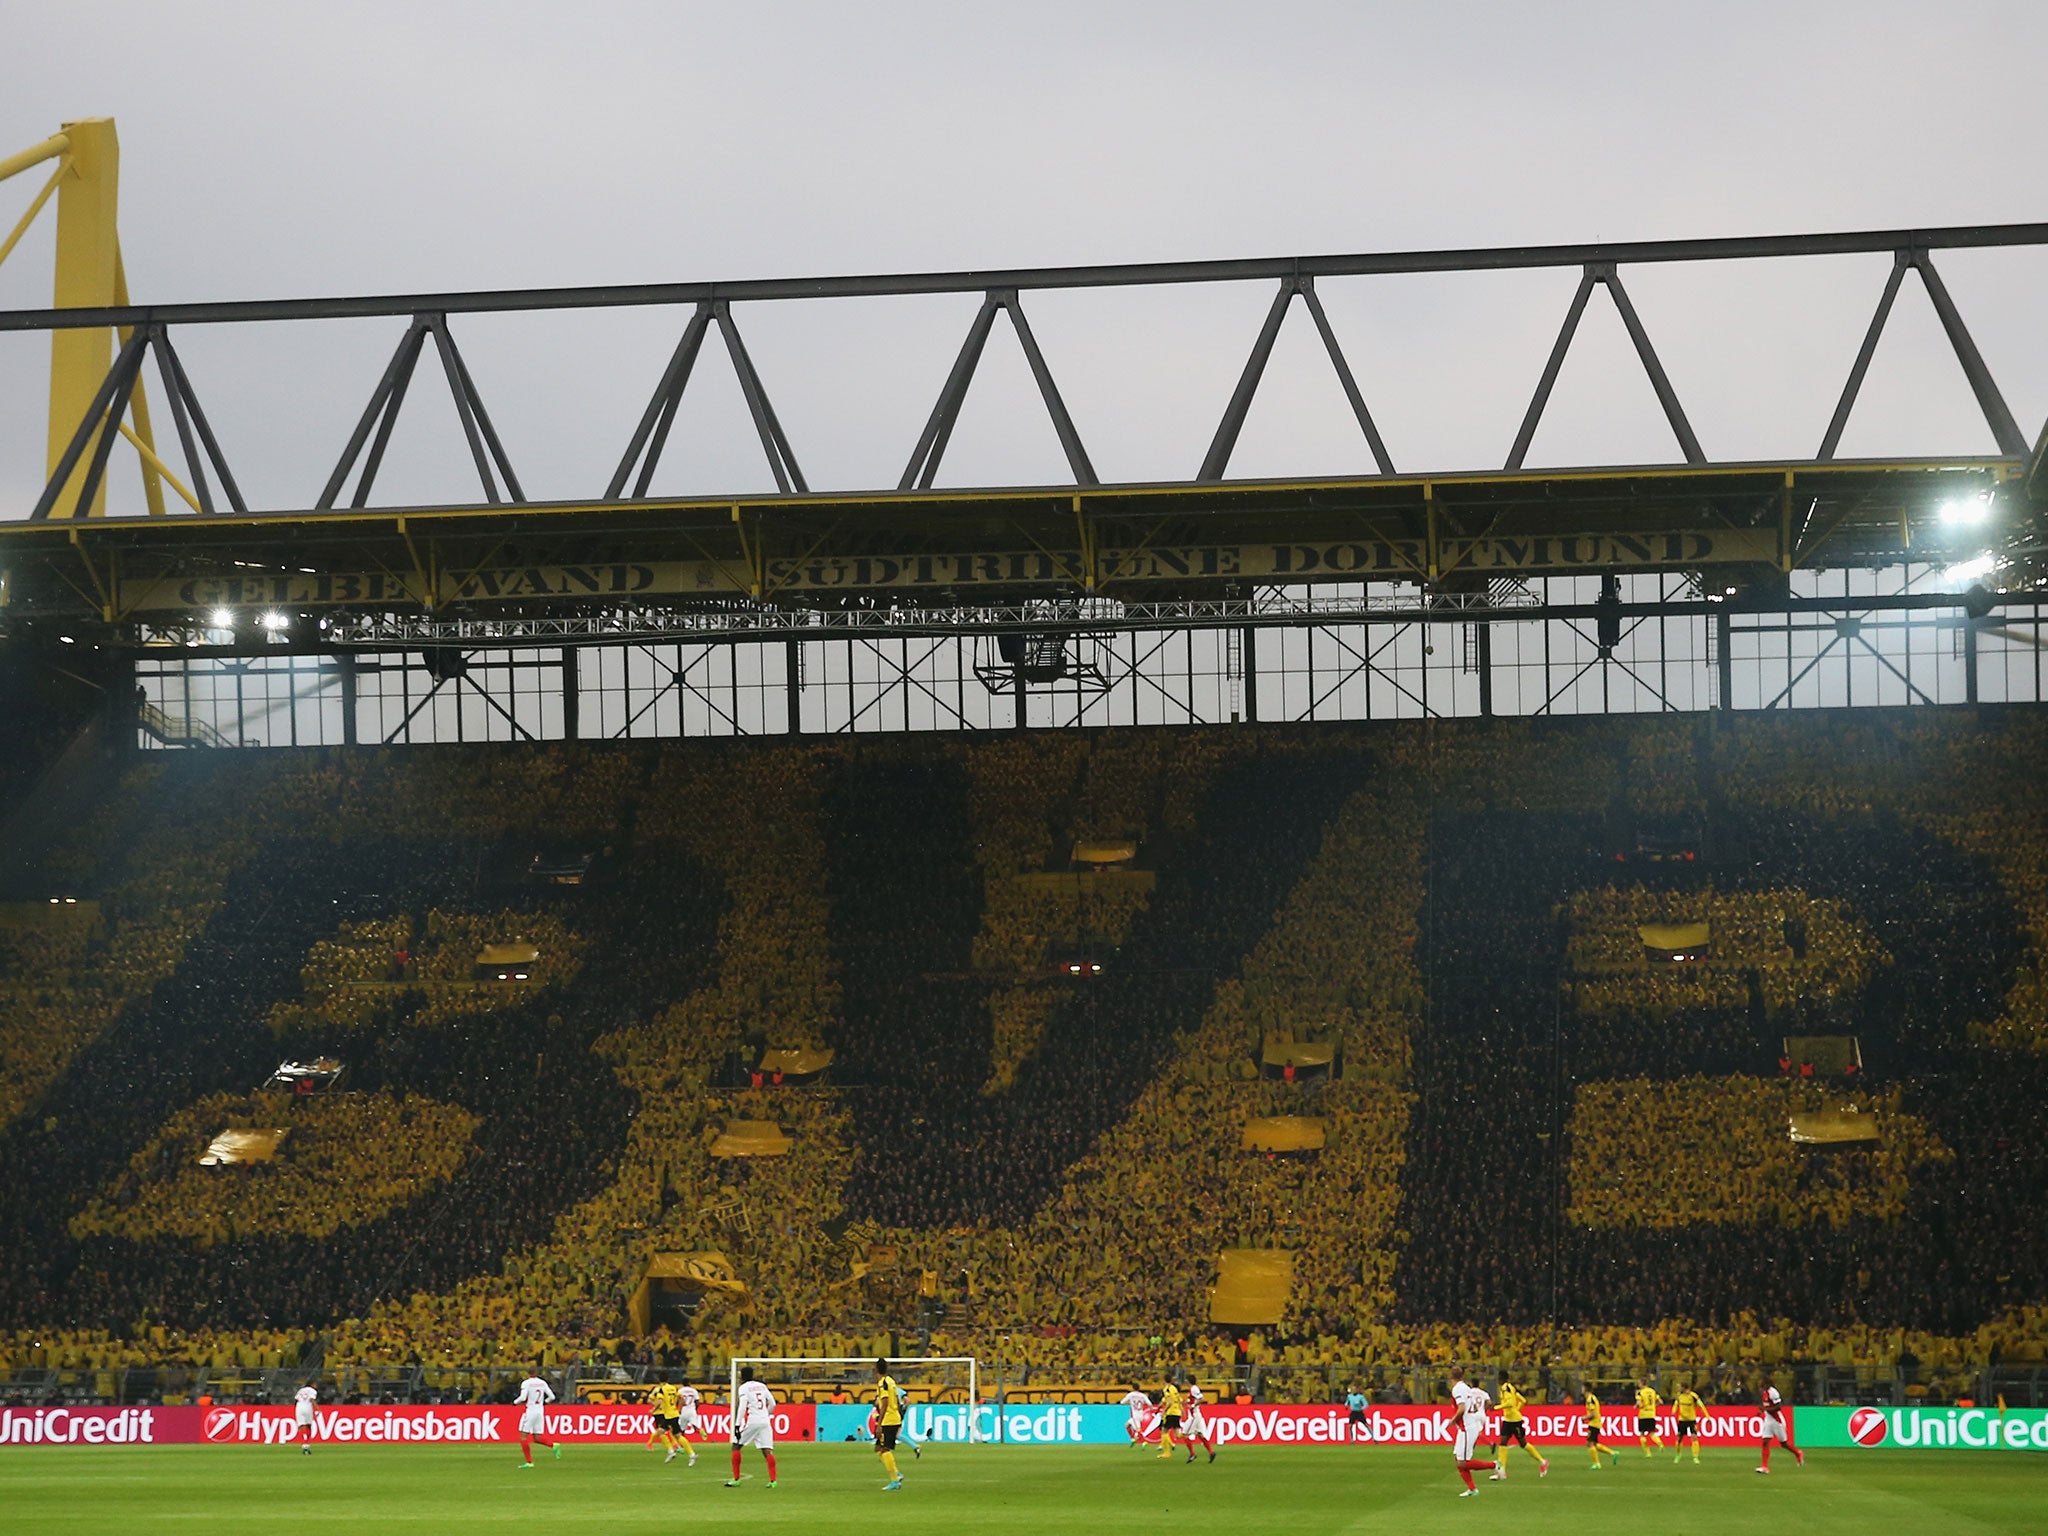 Dortmund take on Monaco 24 hours after the German side's coach was subject to a terrorist attack